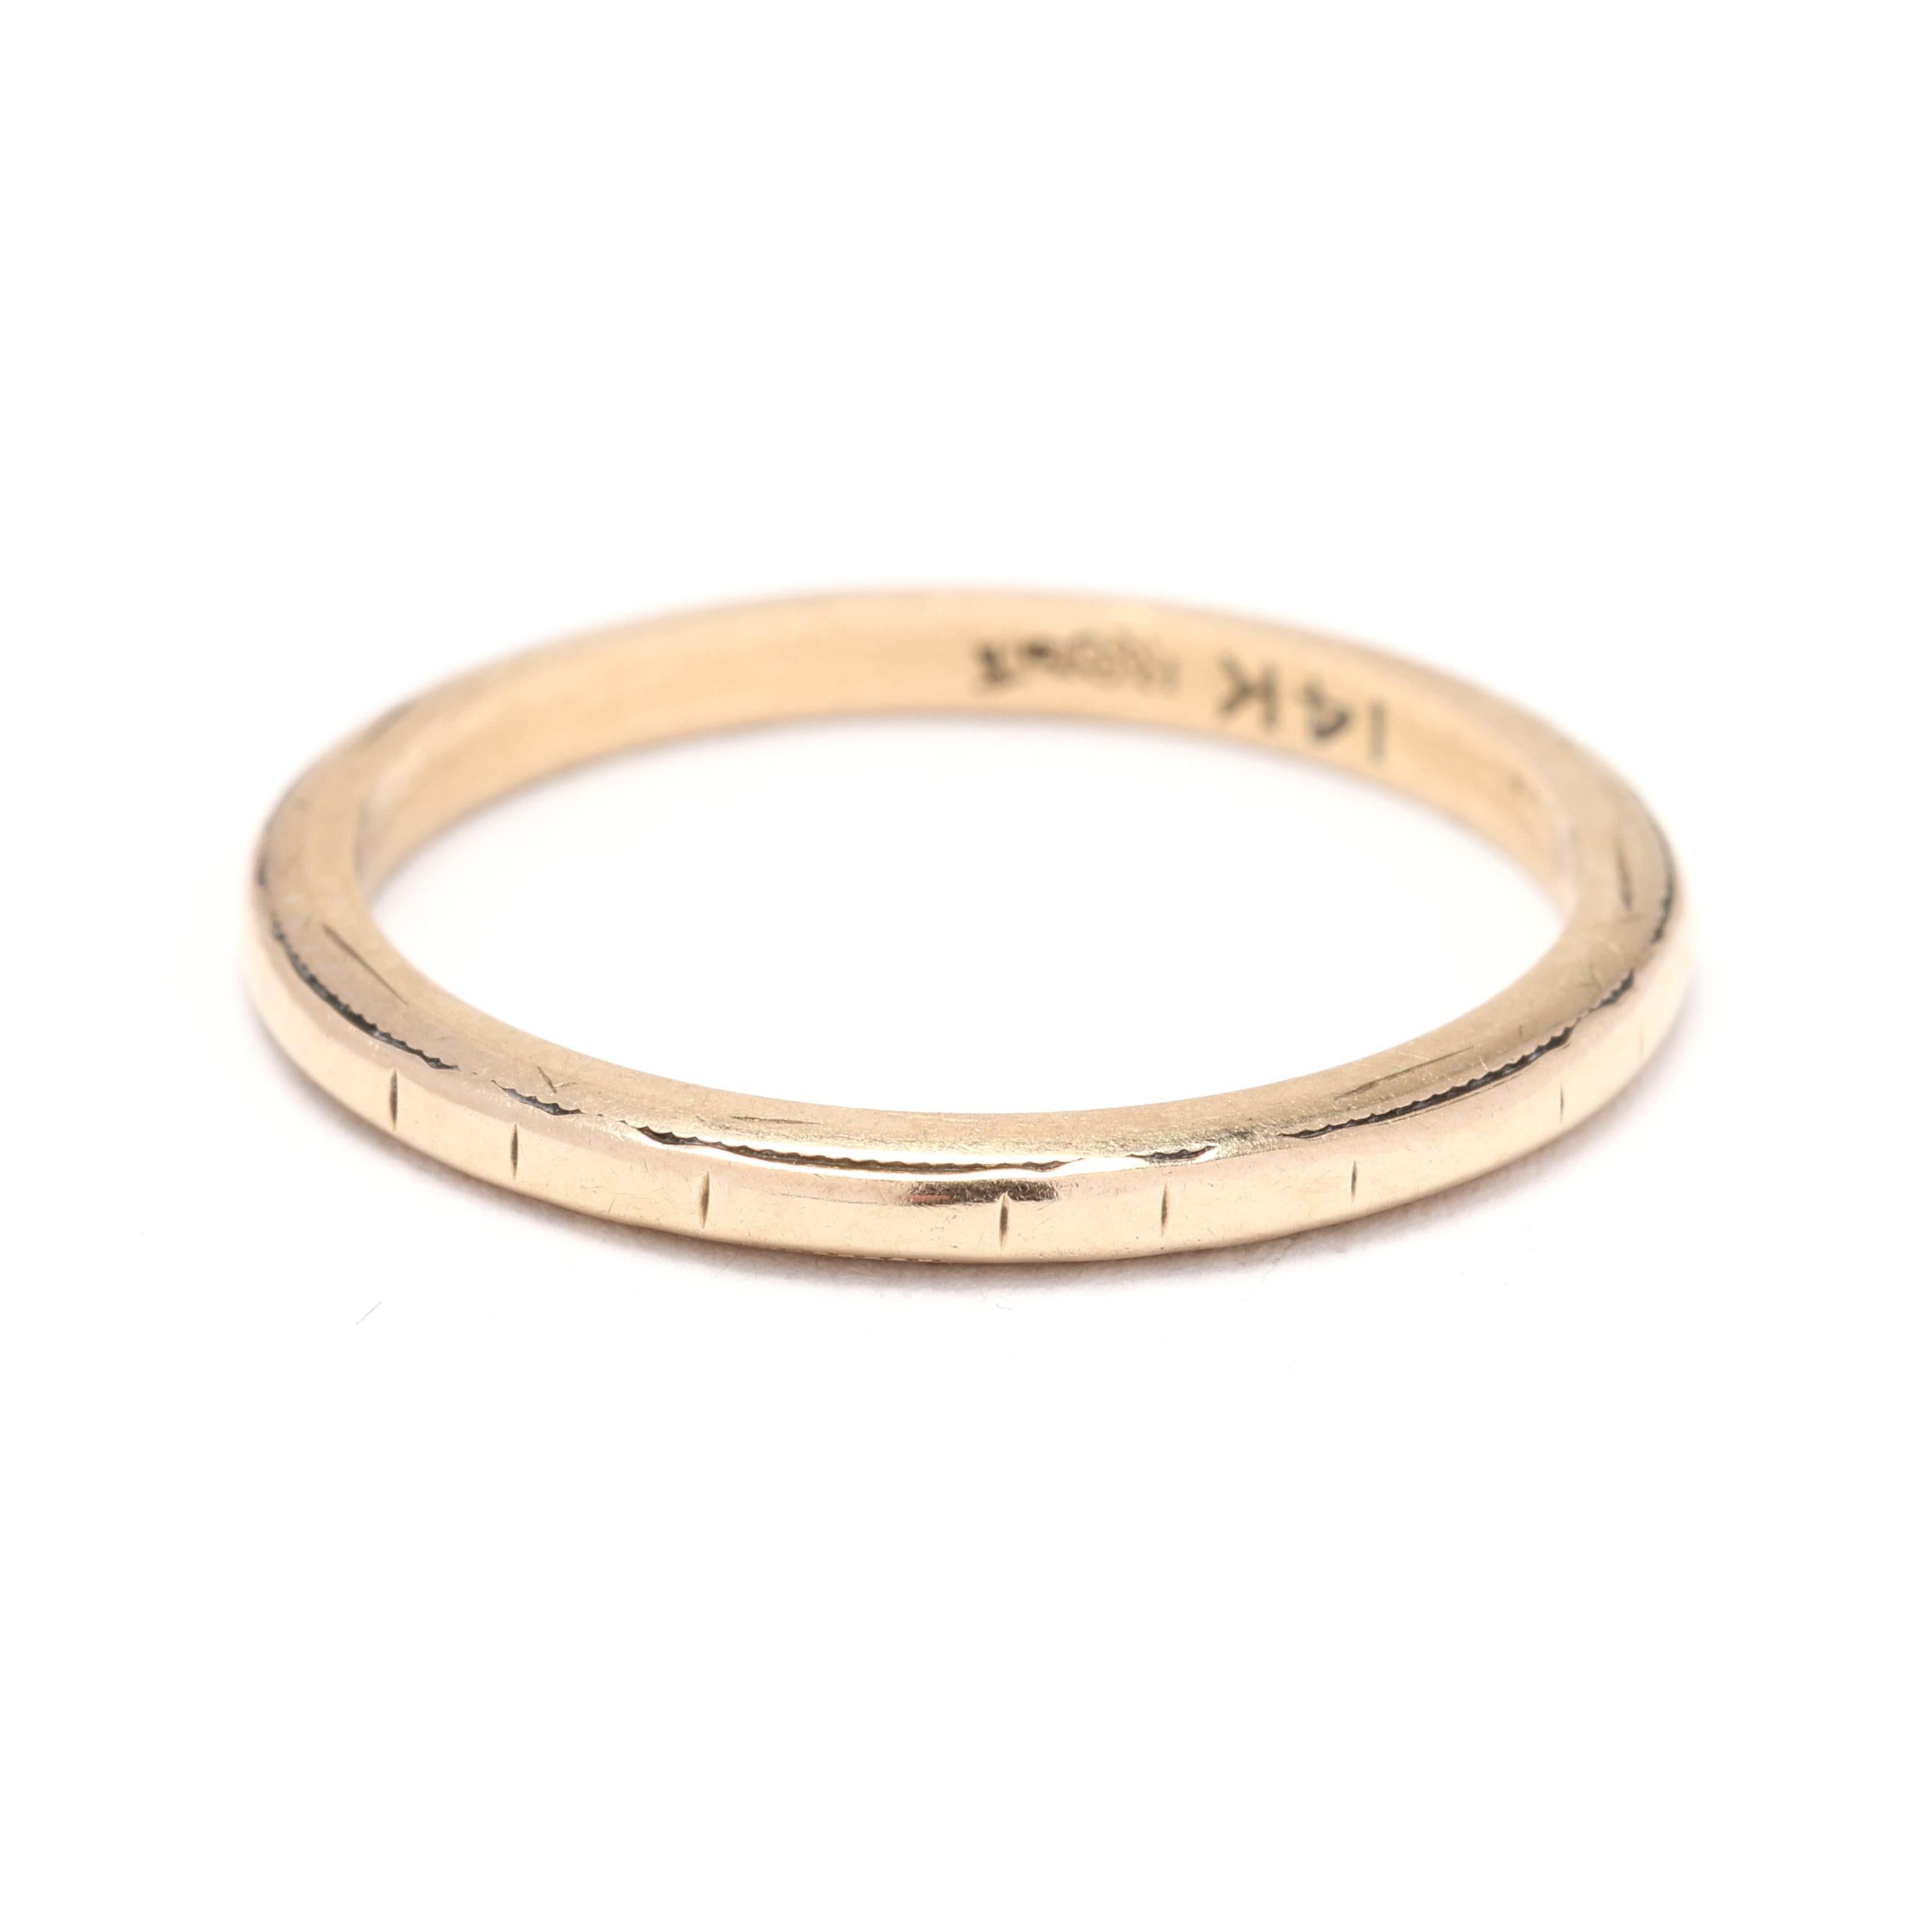 This 14K Yellow Gold Engraved Ring is a beautiful and timeless piece of jewelry that can be worn on its own or stacked with other rings. The ring is made of high-quality 14K yellow gold, ensuring durability and long-lasting shine. The band is